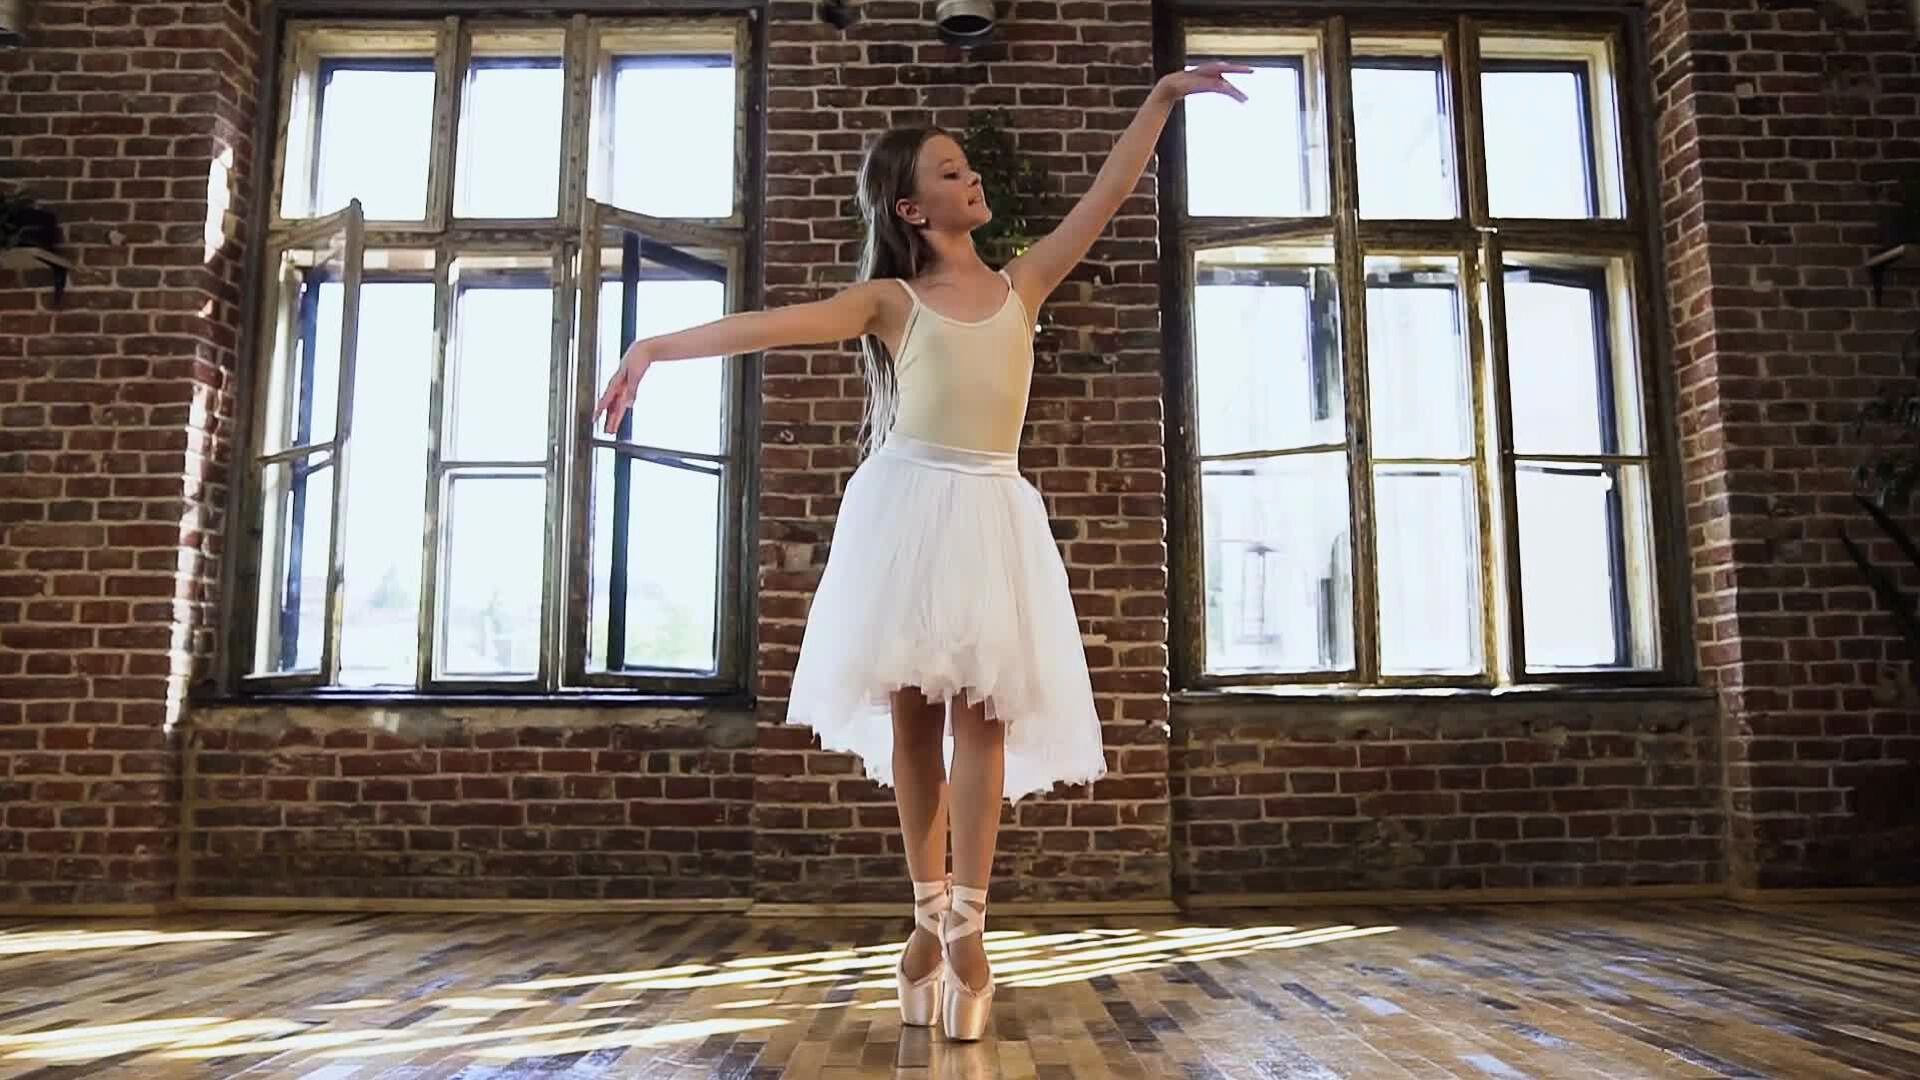 A girl in white tutu dress dancing ballet in front of the windows